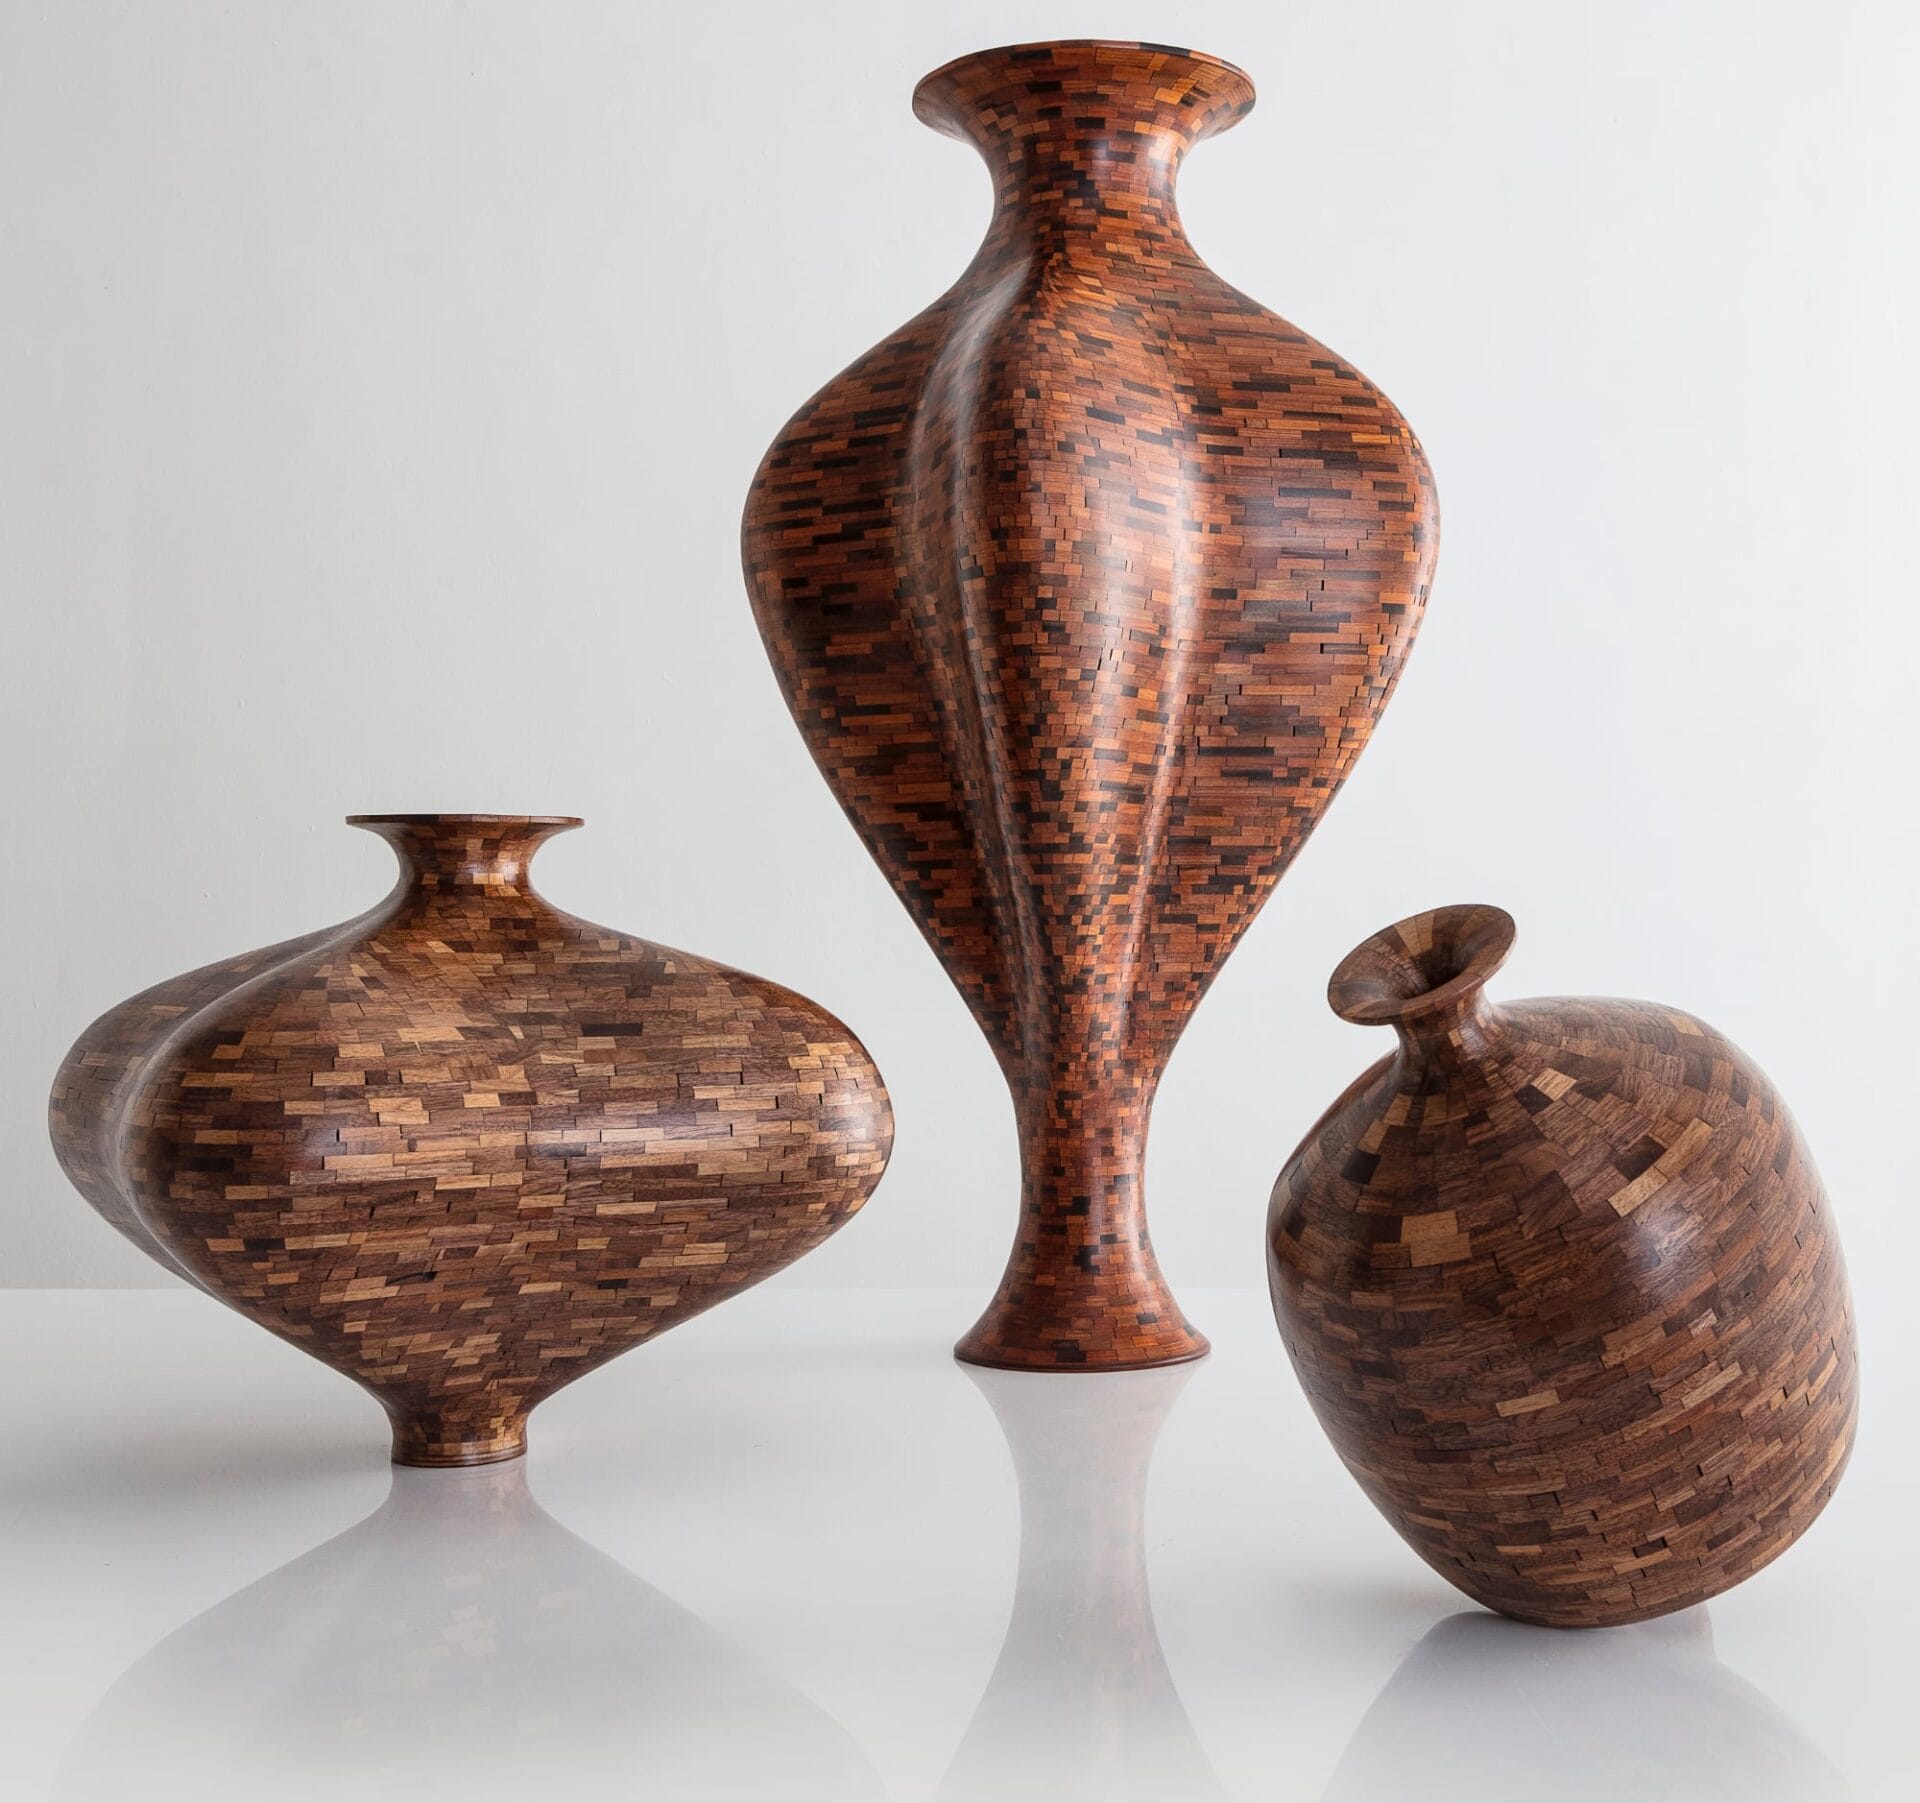 three wooden vessels made of wood components fitted together